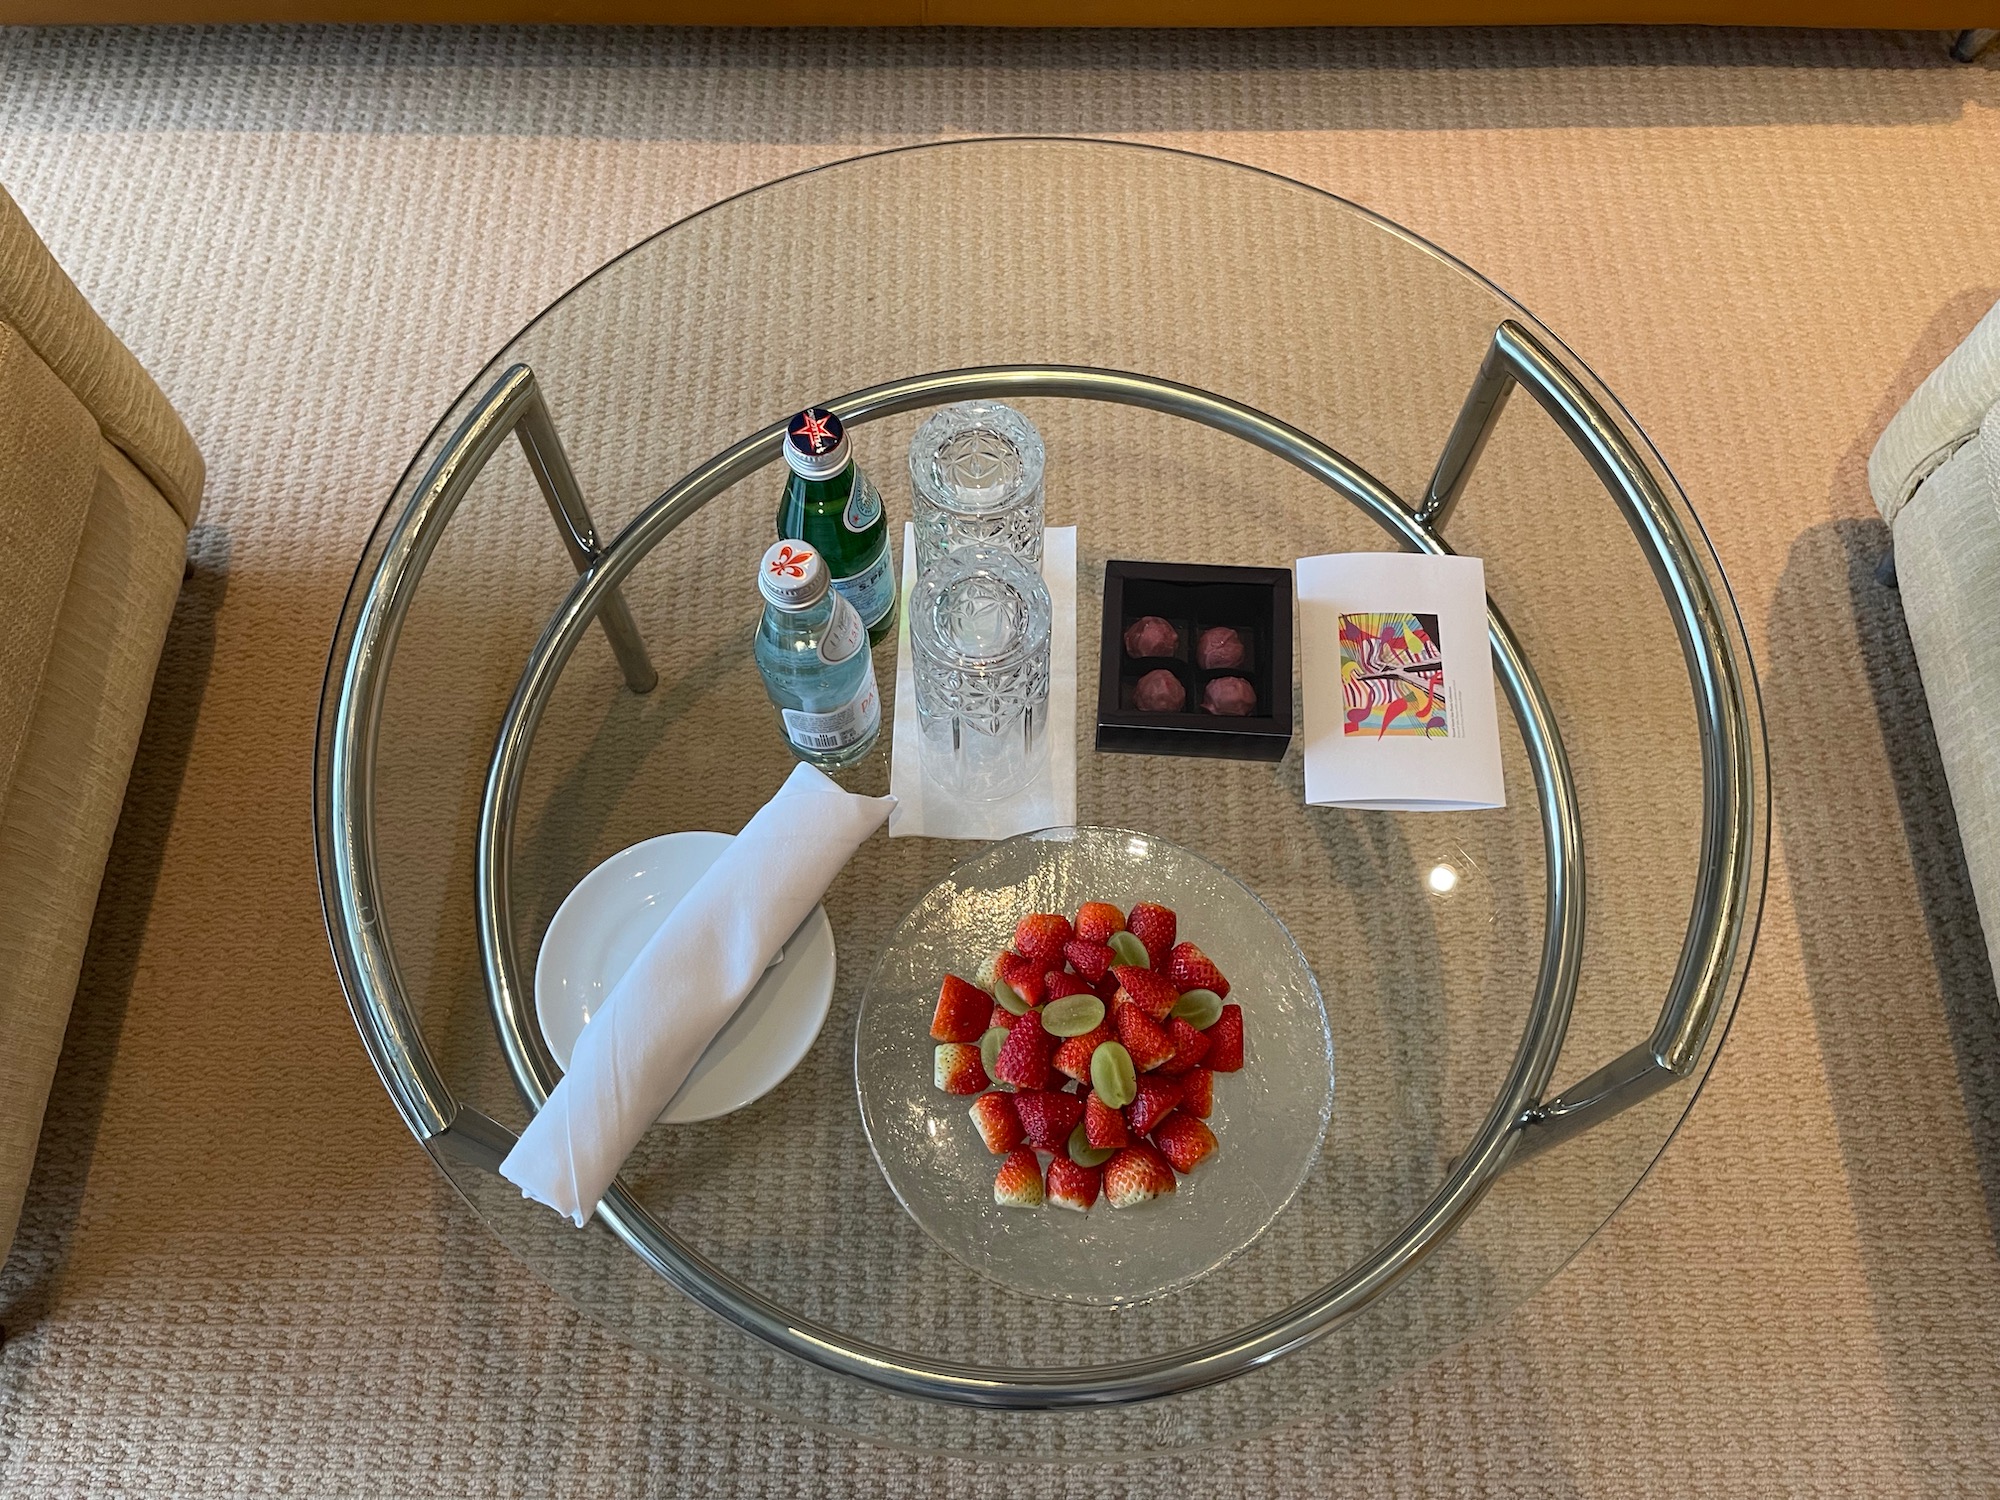 a glass table with food and drinks on it